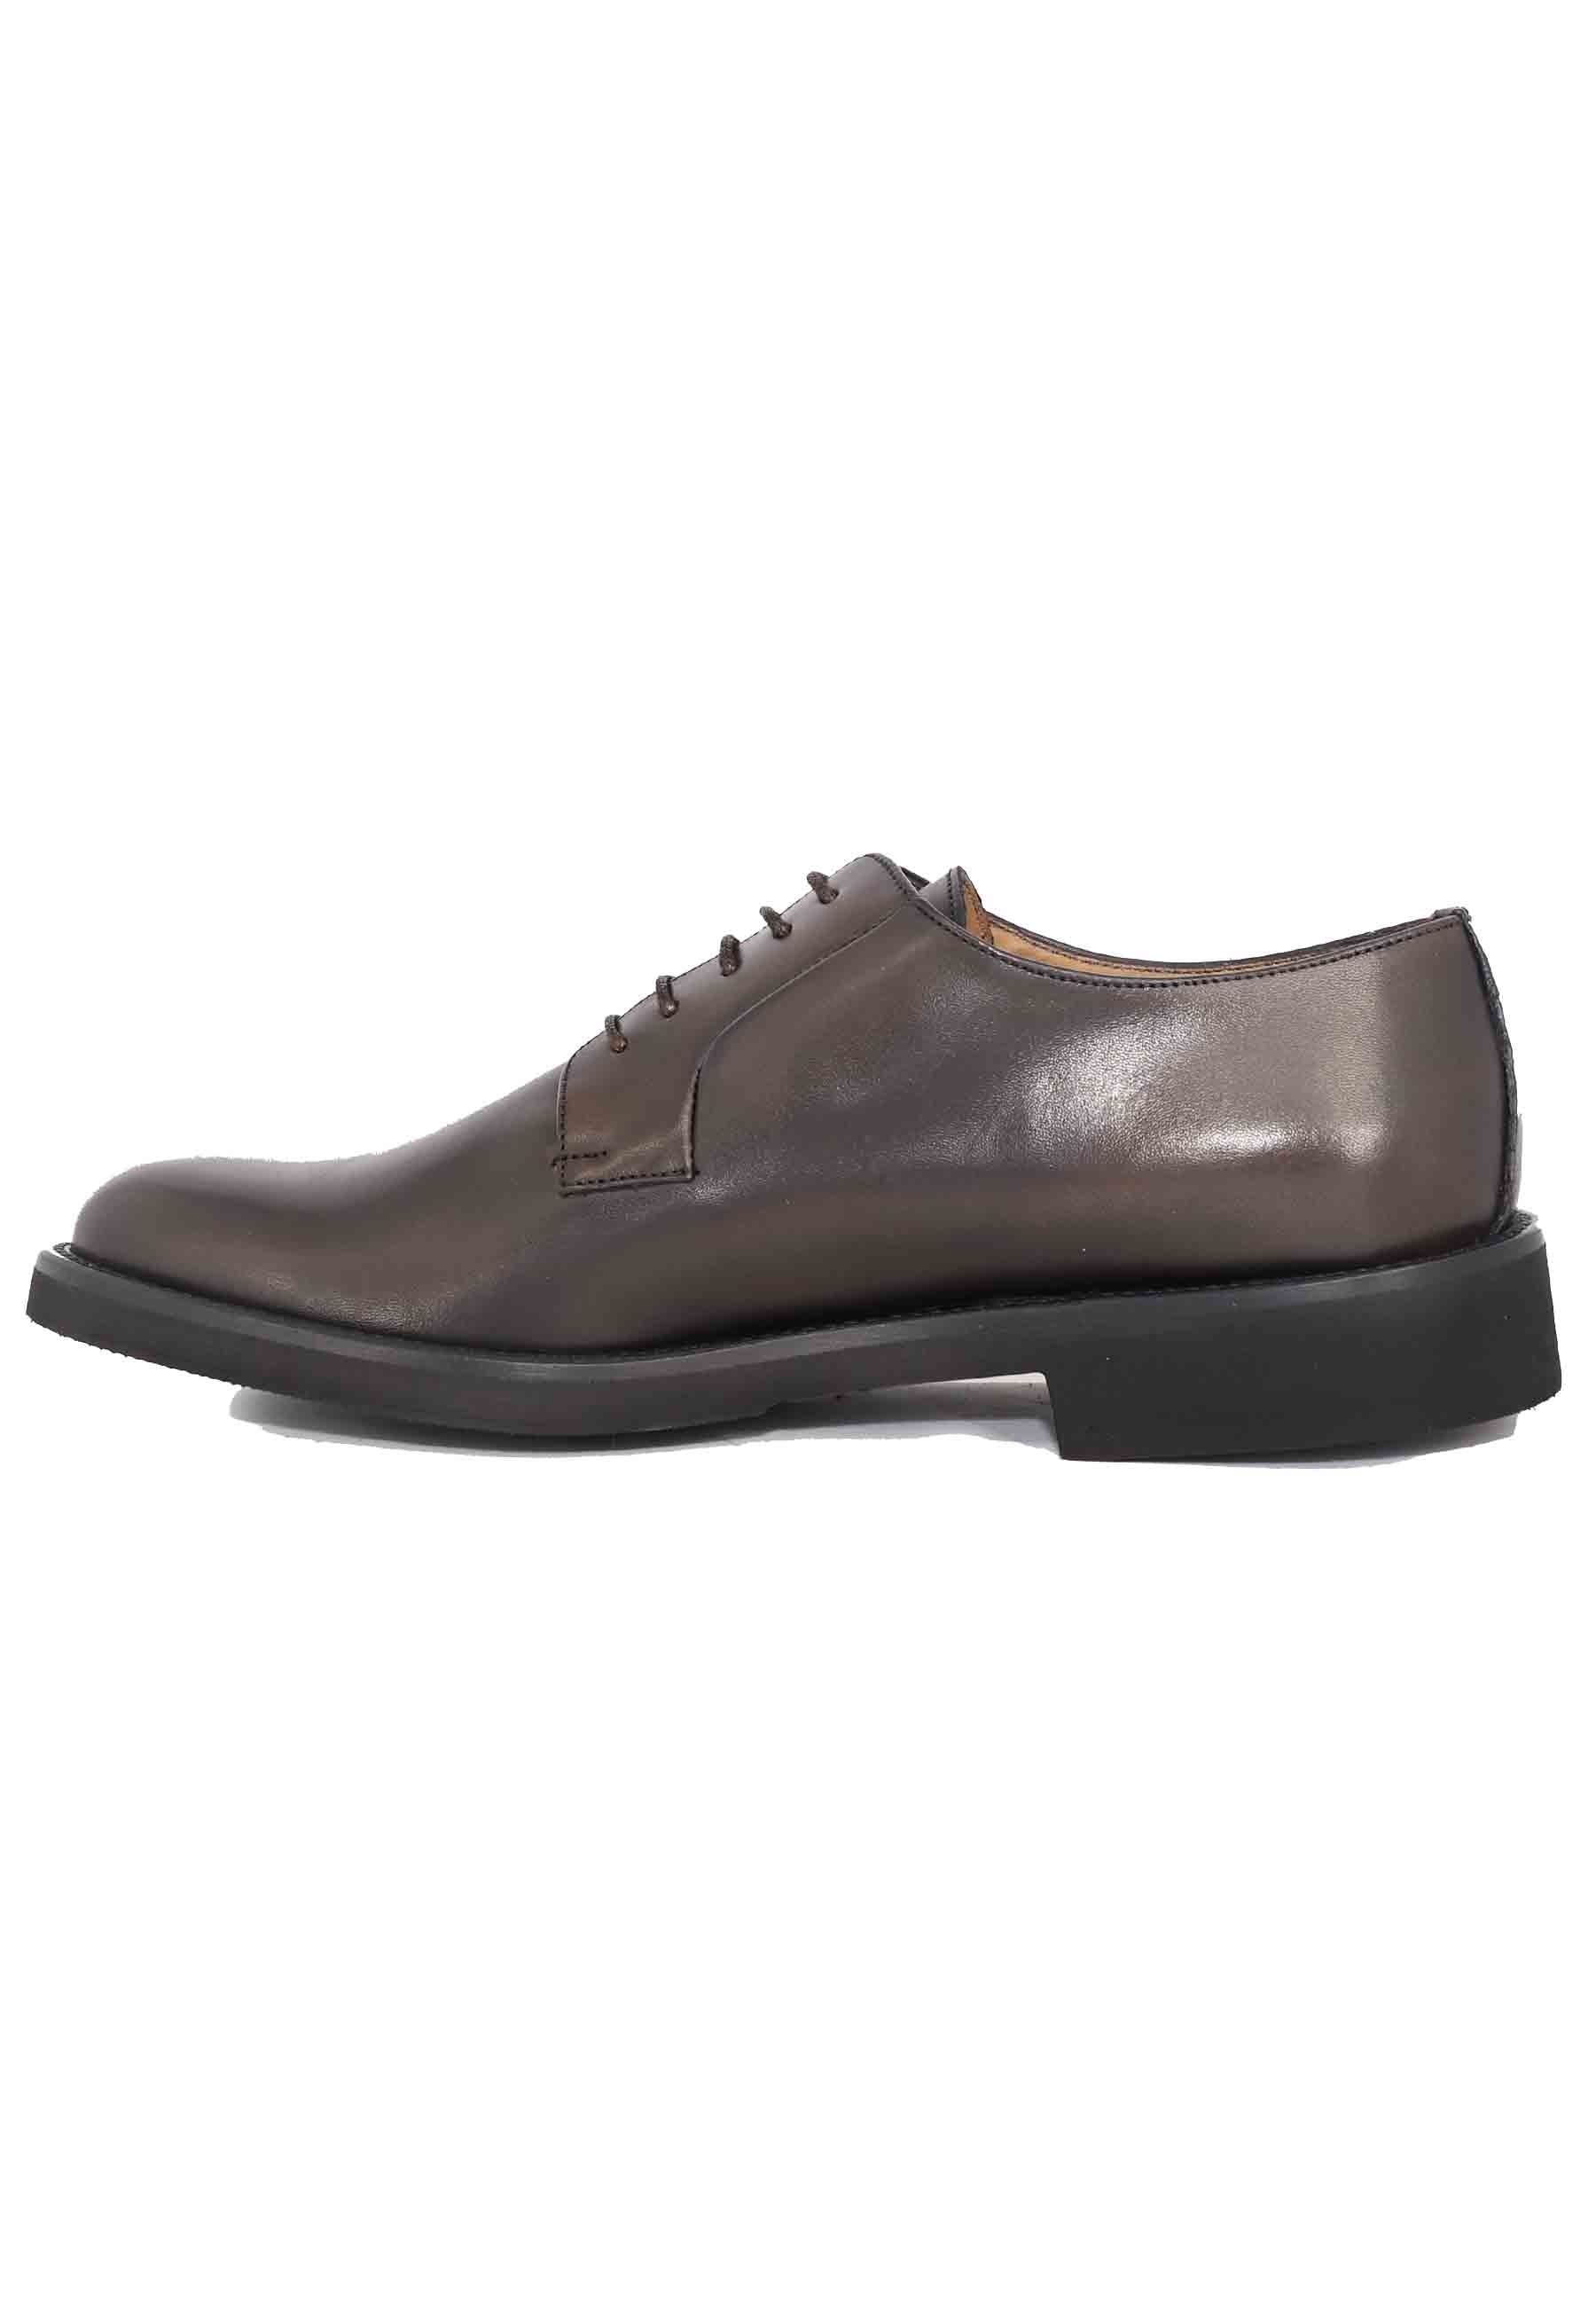 Men's lace-ups in brown leather with ultra-light rubber sole and round toe